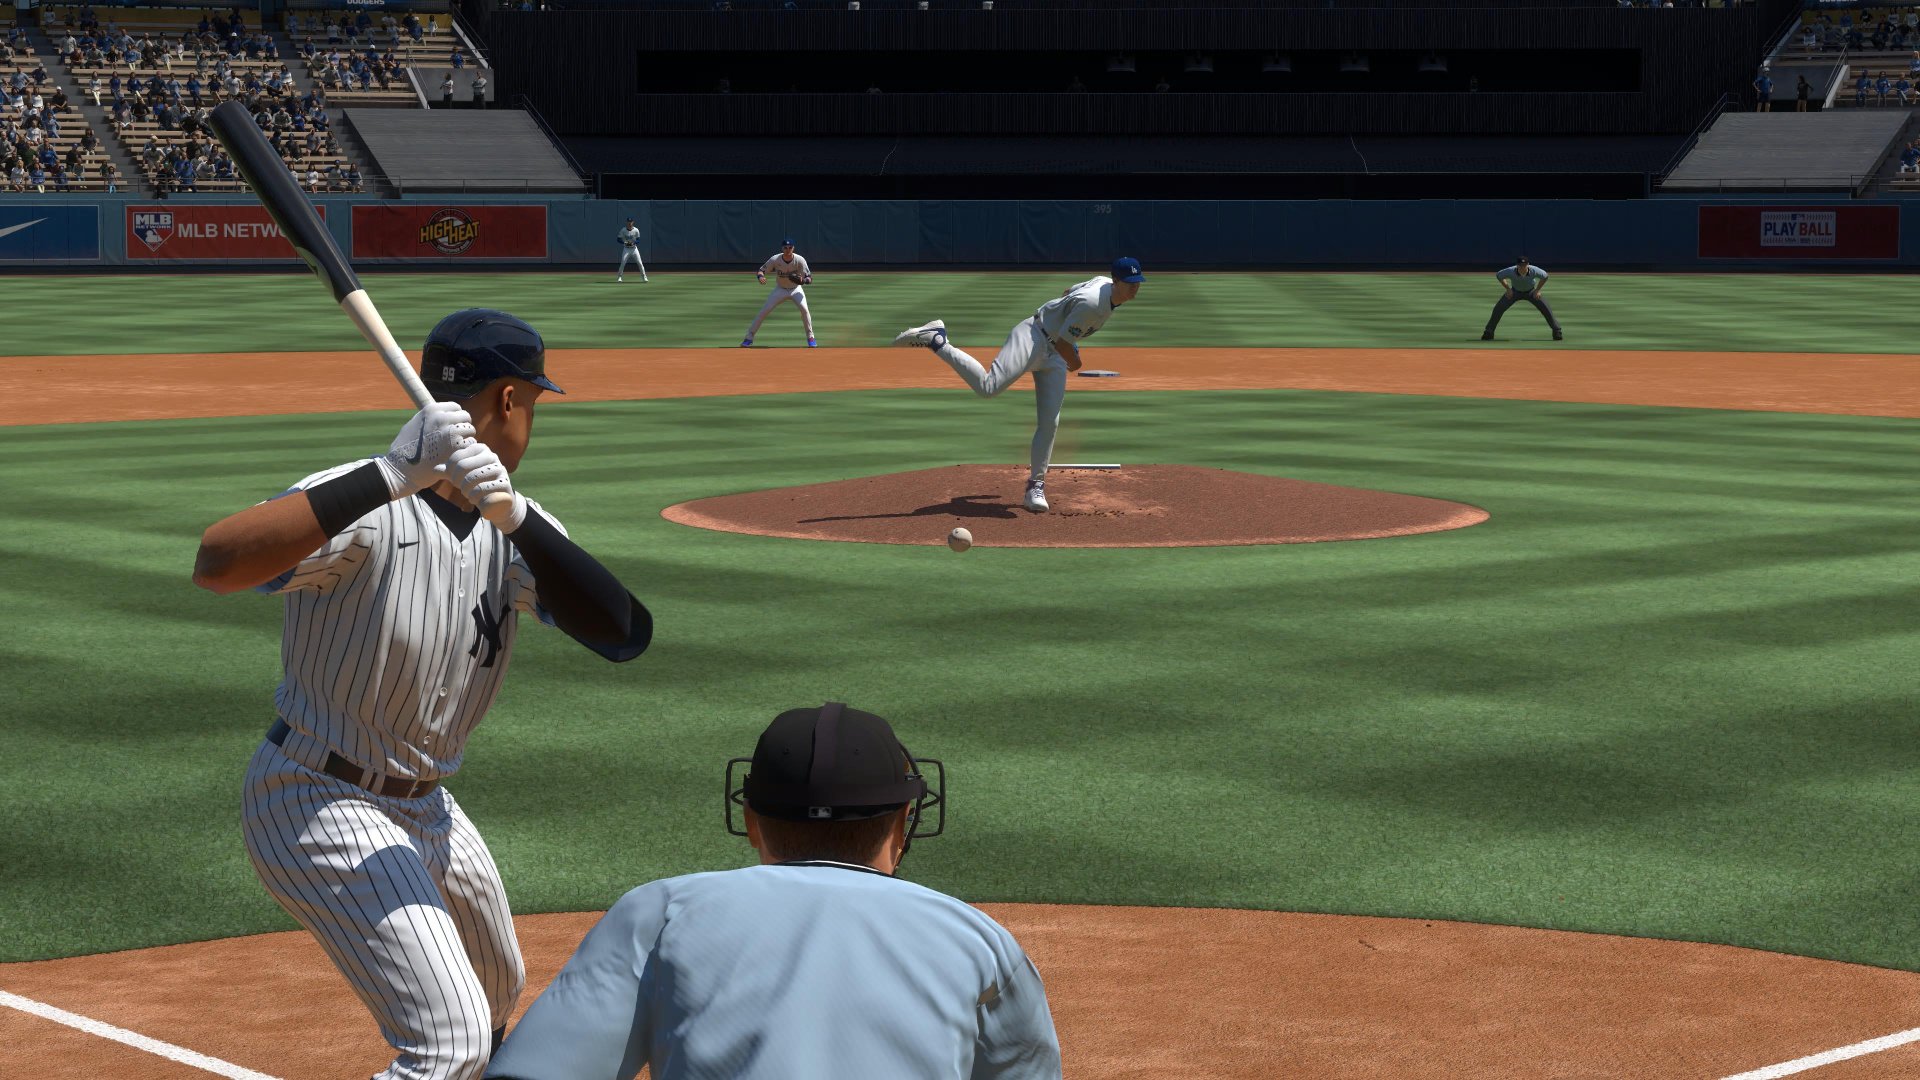 MLB The Show 22 Review (PS5) - The Show Must Go On - GamerBraves